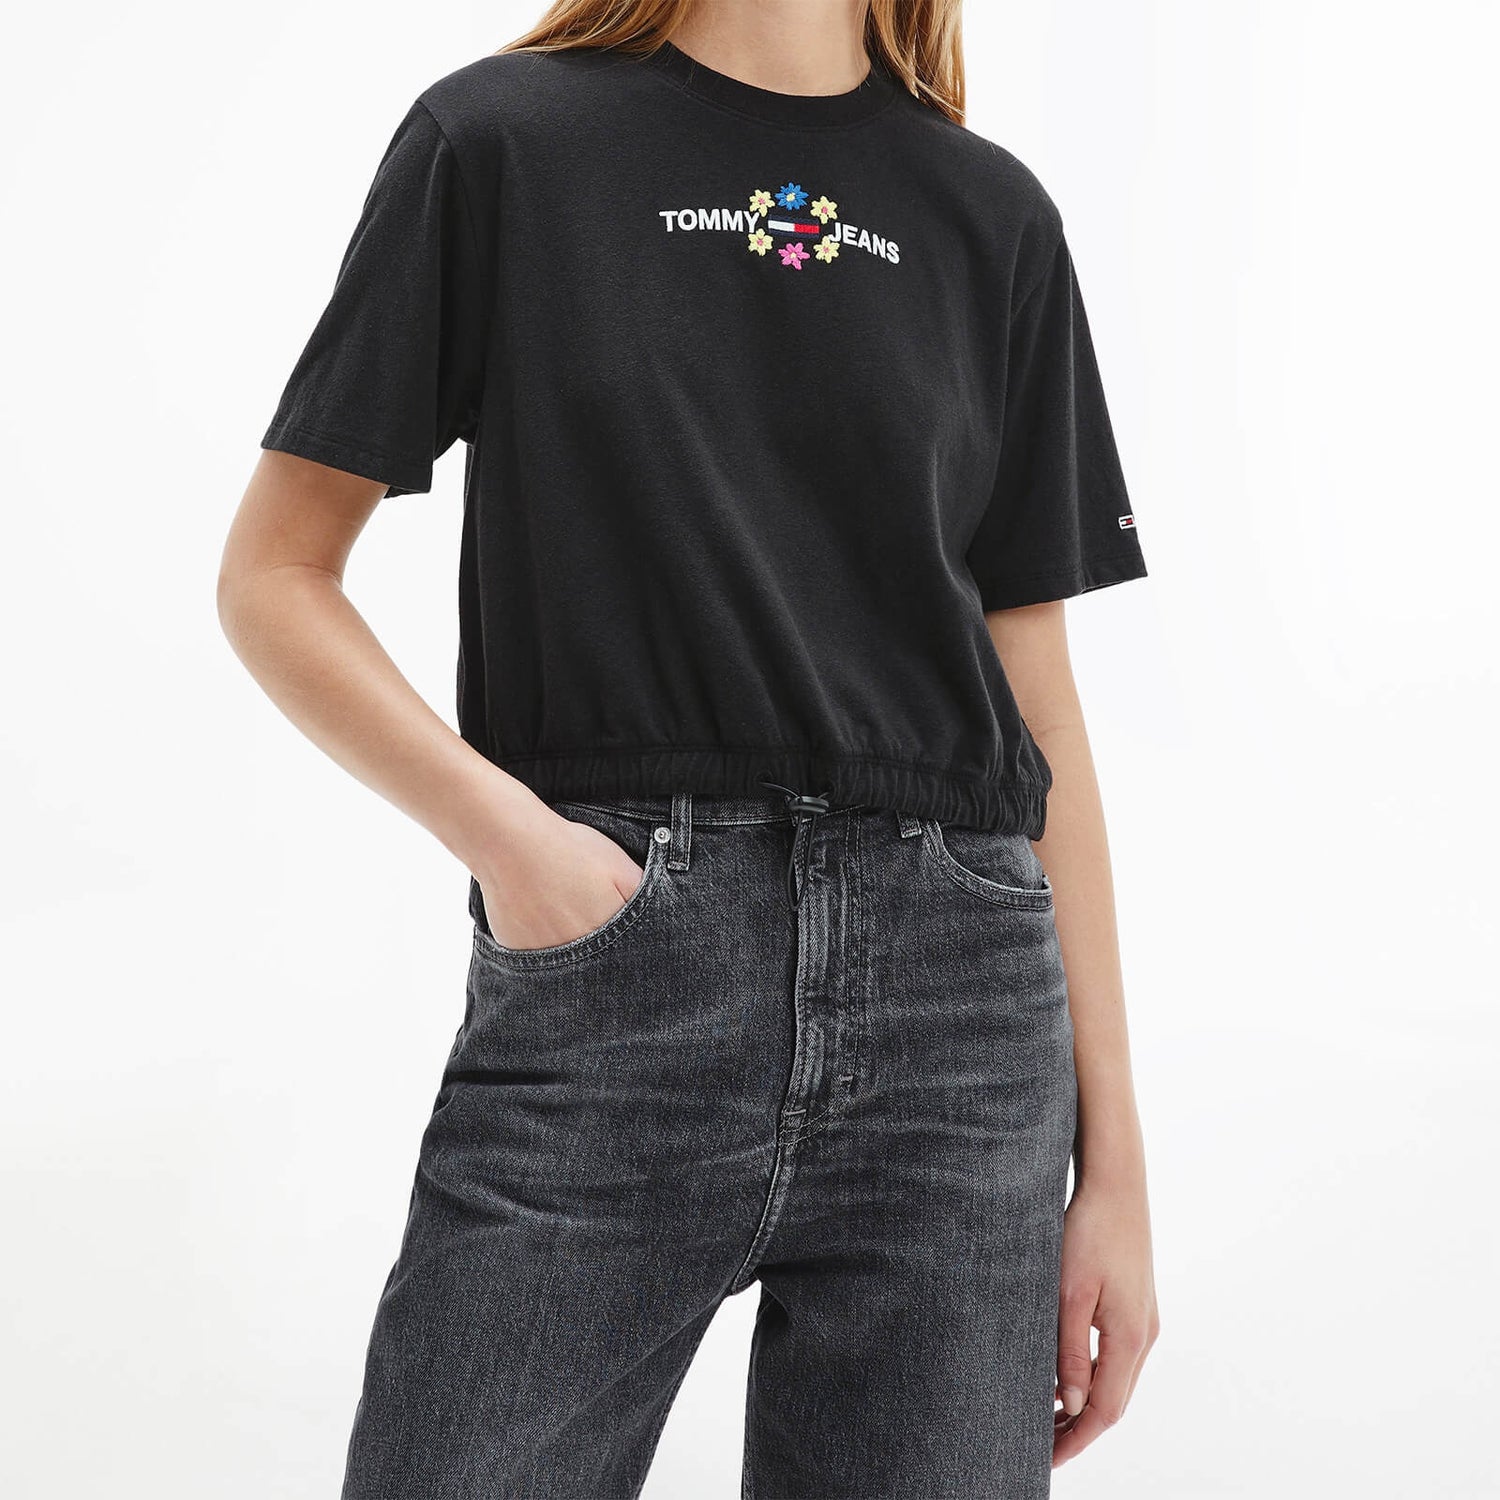 Tommy Jeans Women's Sustainable Crop Floral T-Shirt - Black